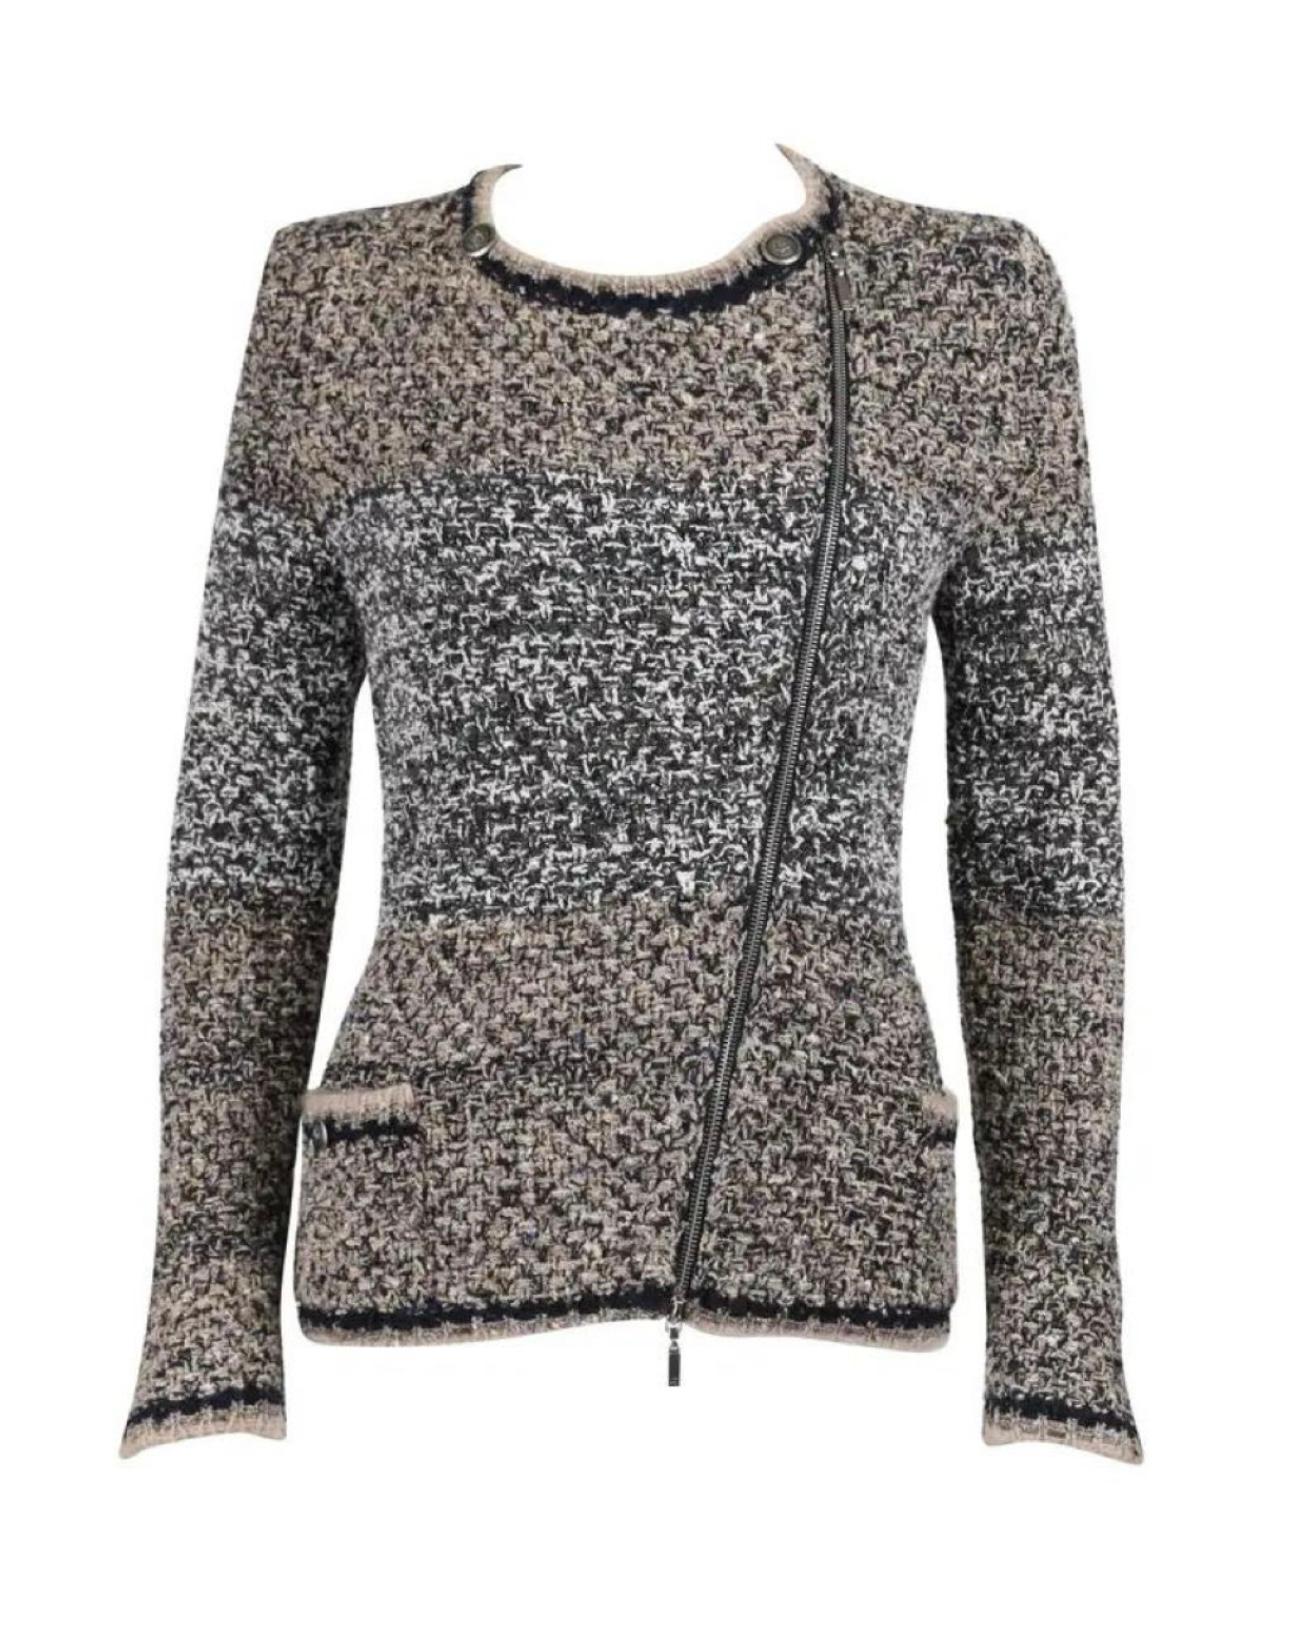 Chanel CC Buttons Silk Woven Tweed Cardi Jacket In Excellent Condition For Sale In Dubai, AE